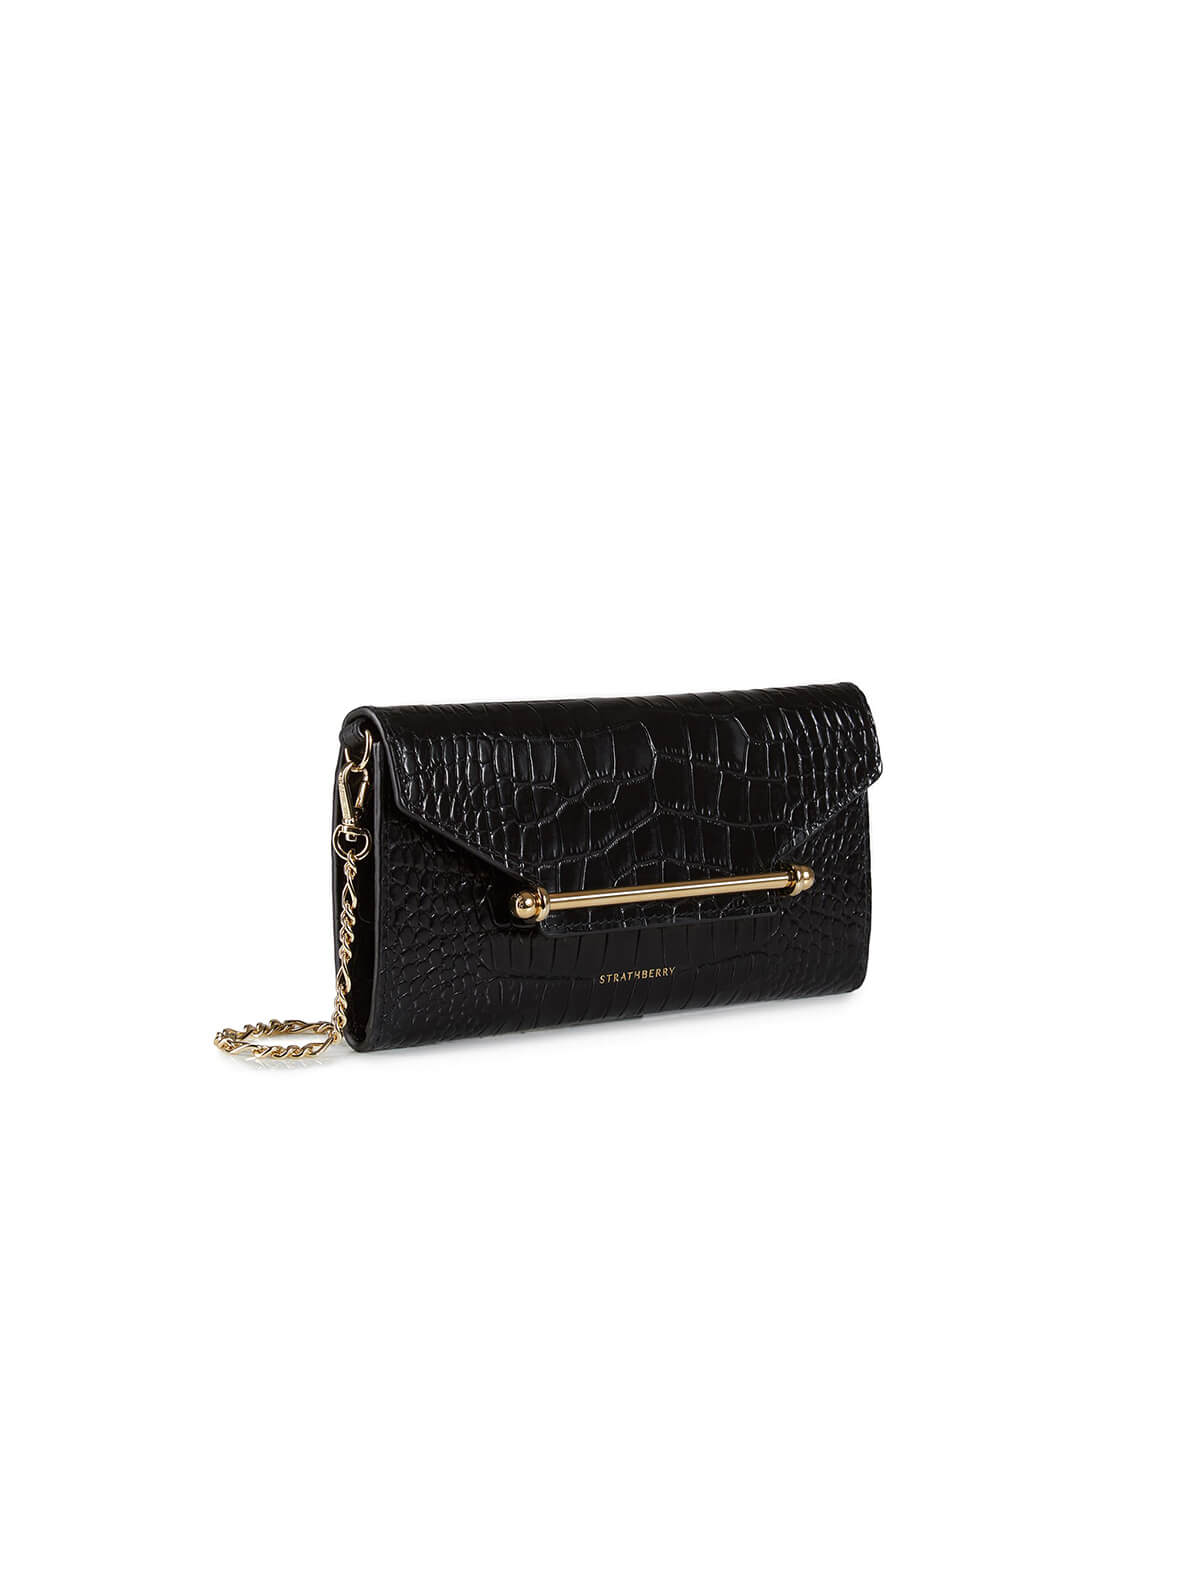 STRATHBERRY Multrees Wallet on Chain in Embossed Croc Black